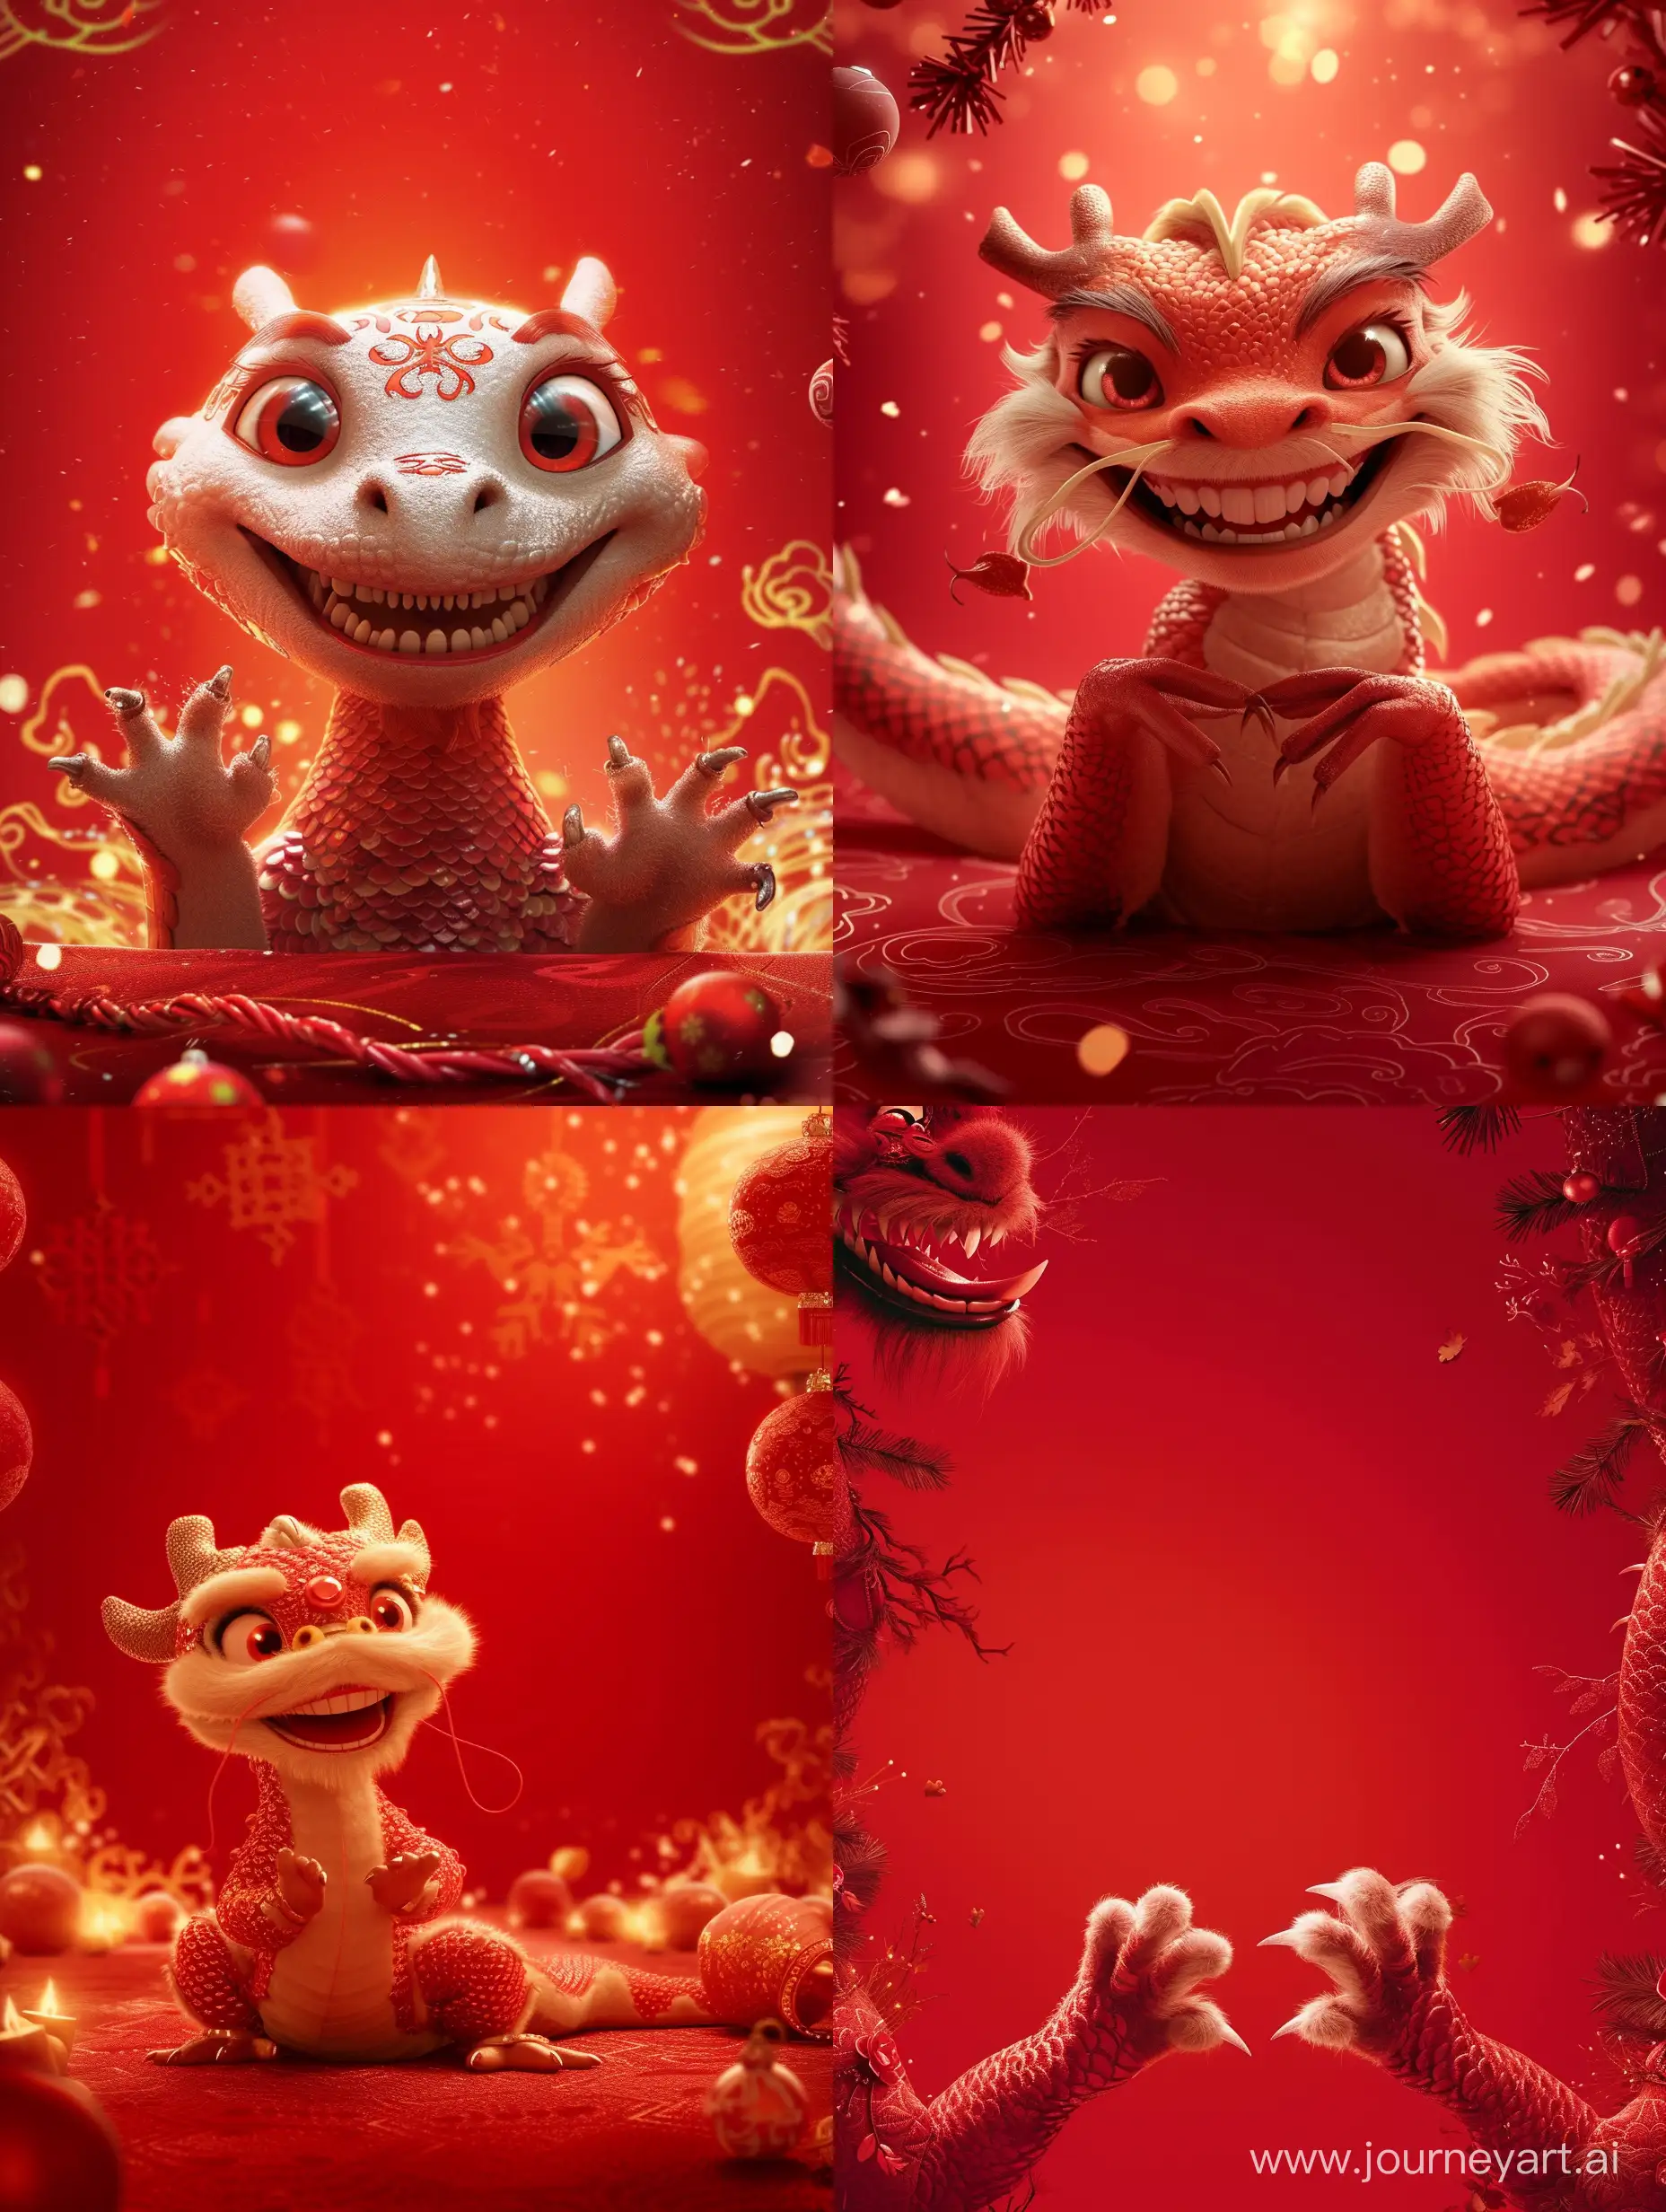 Traditional-Chinese-Dragon-Celebration-in-Festive-Red-Setting